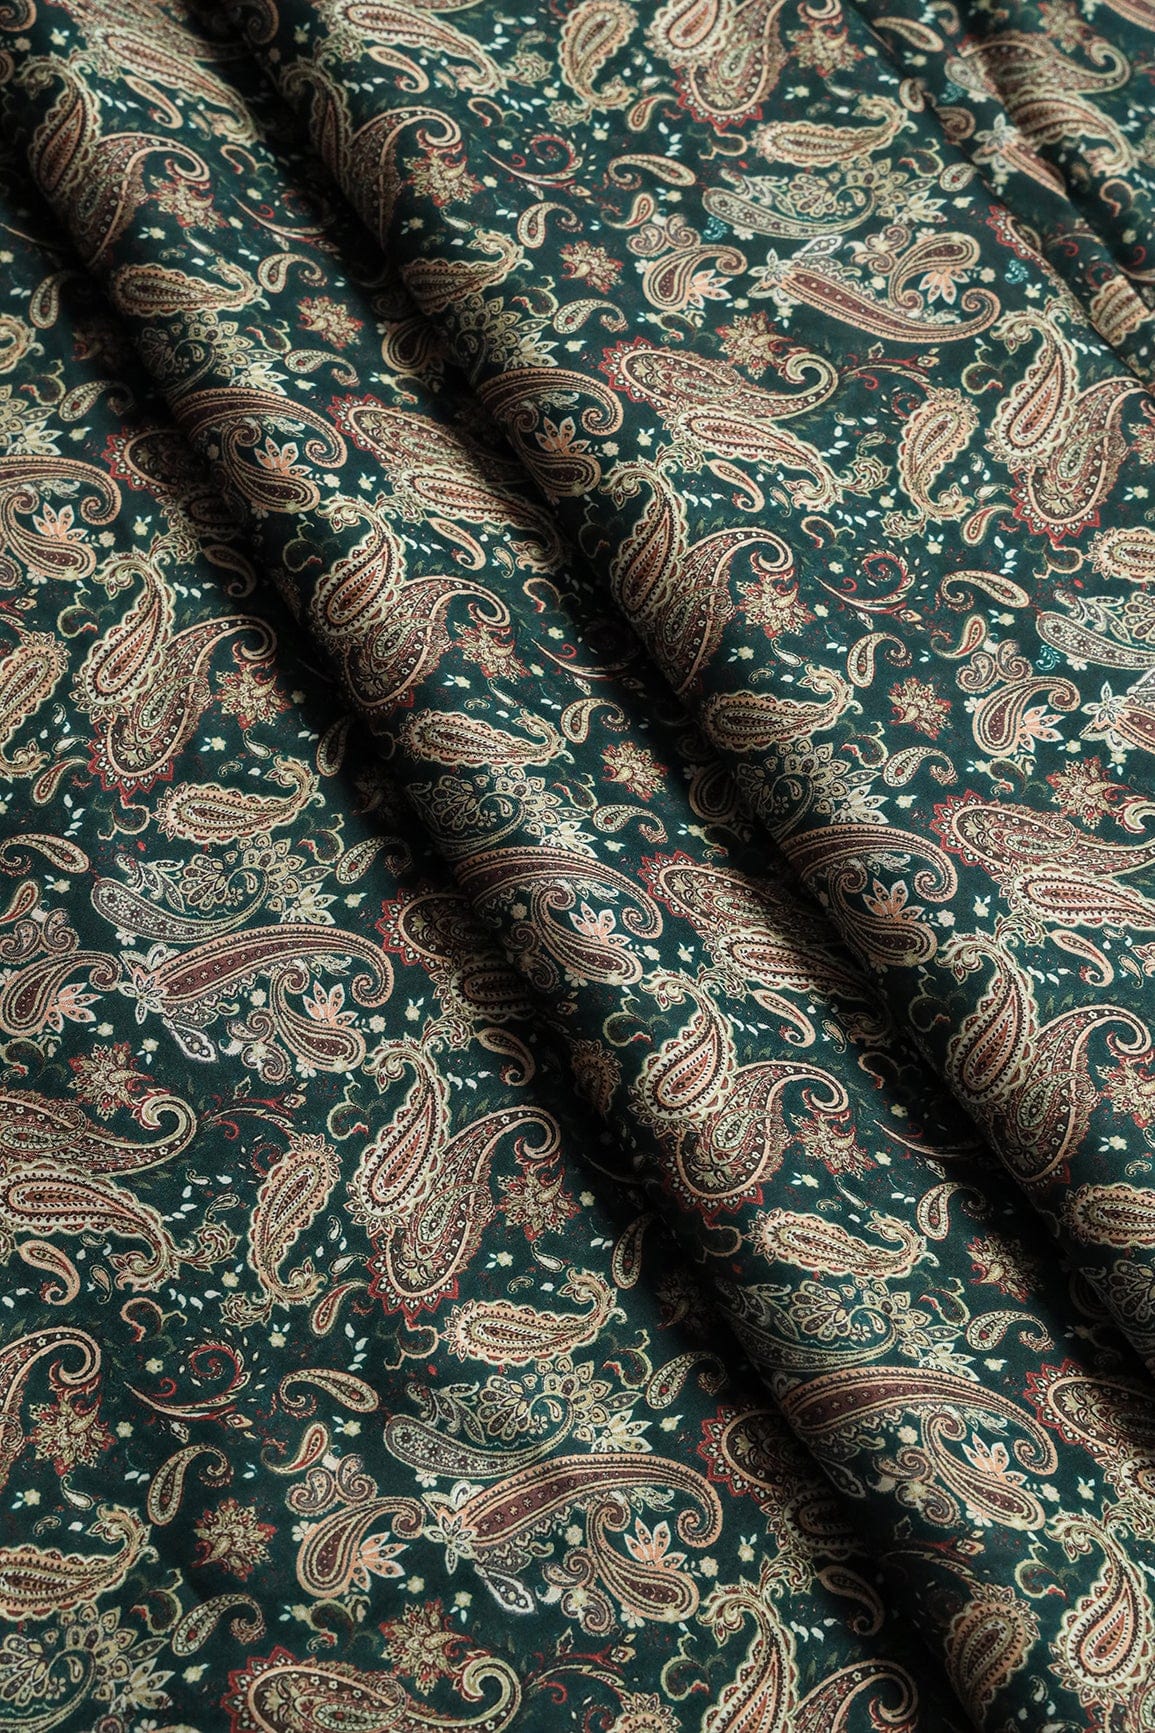 doeraa Prints Cream And Peach Paisley Pattern Digital Print On Forest Green Georgette Satin Fabric